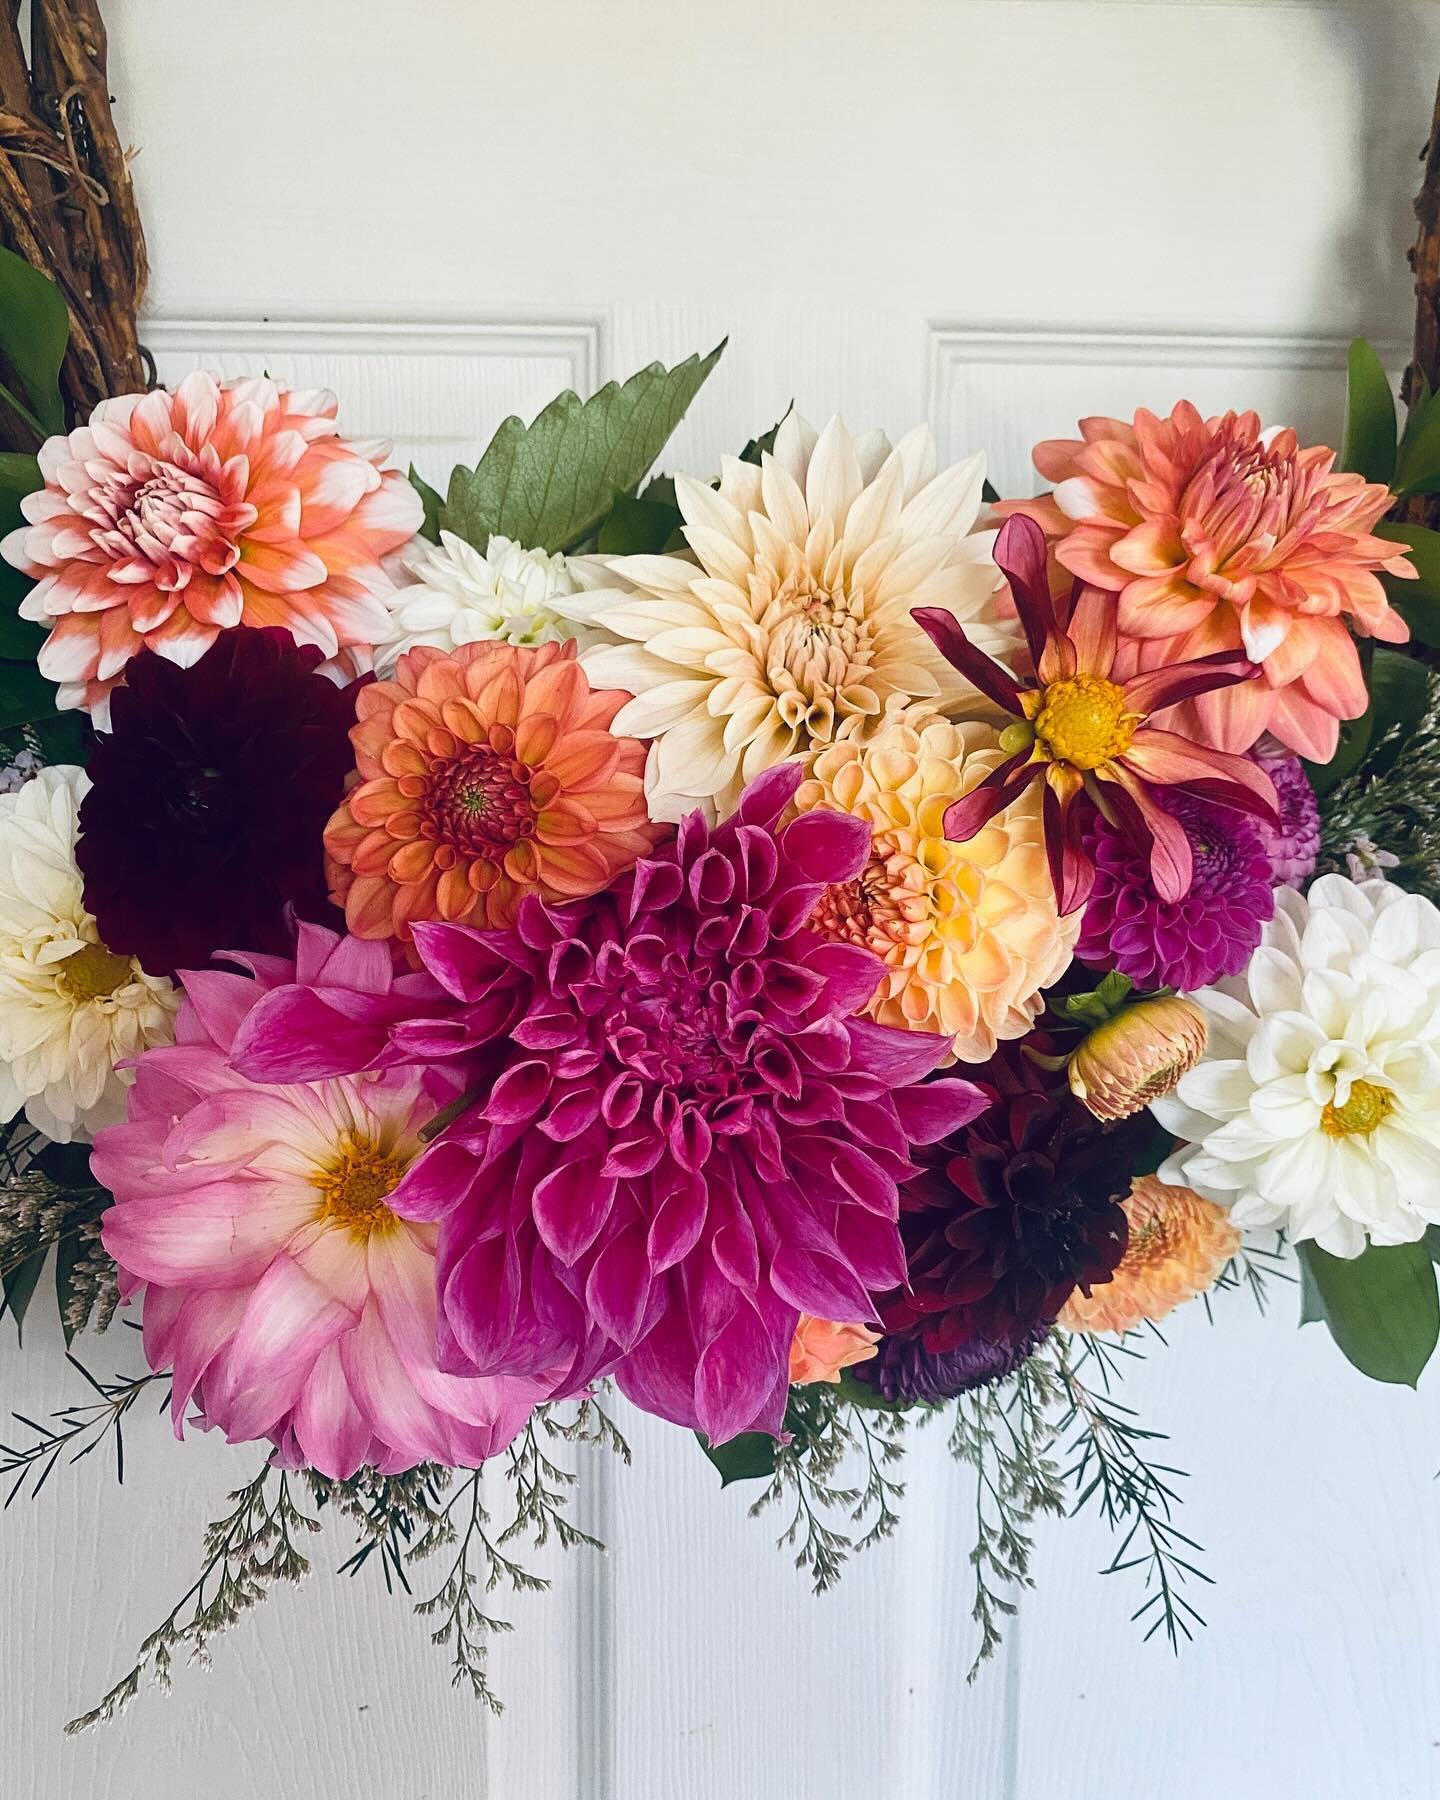 These are our dahlias! And now you can purchase our tubers to plant in your own garden! Each order comes with a planting/care Guide as well as a &quot;mystery&quot; tuber.

Dahlia tubers bring hope and joy. They make wonderful gifts for flower lovers